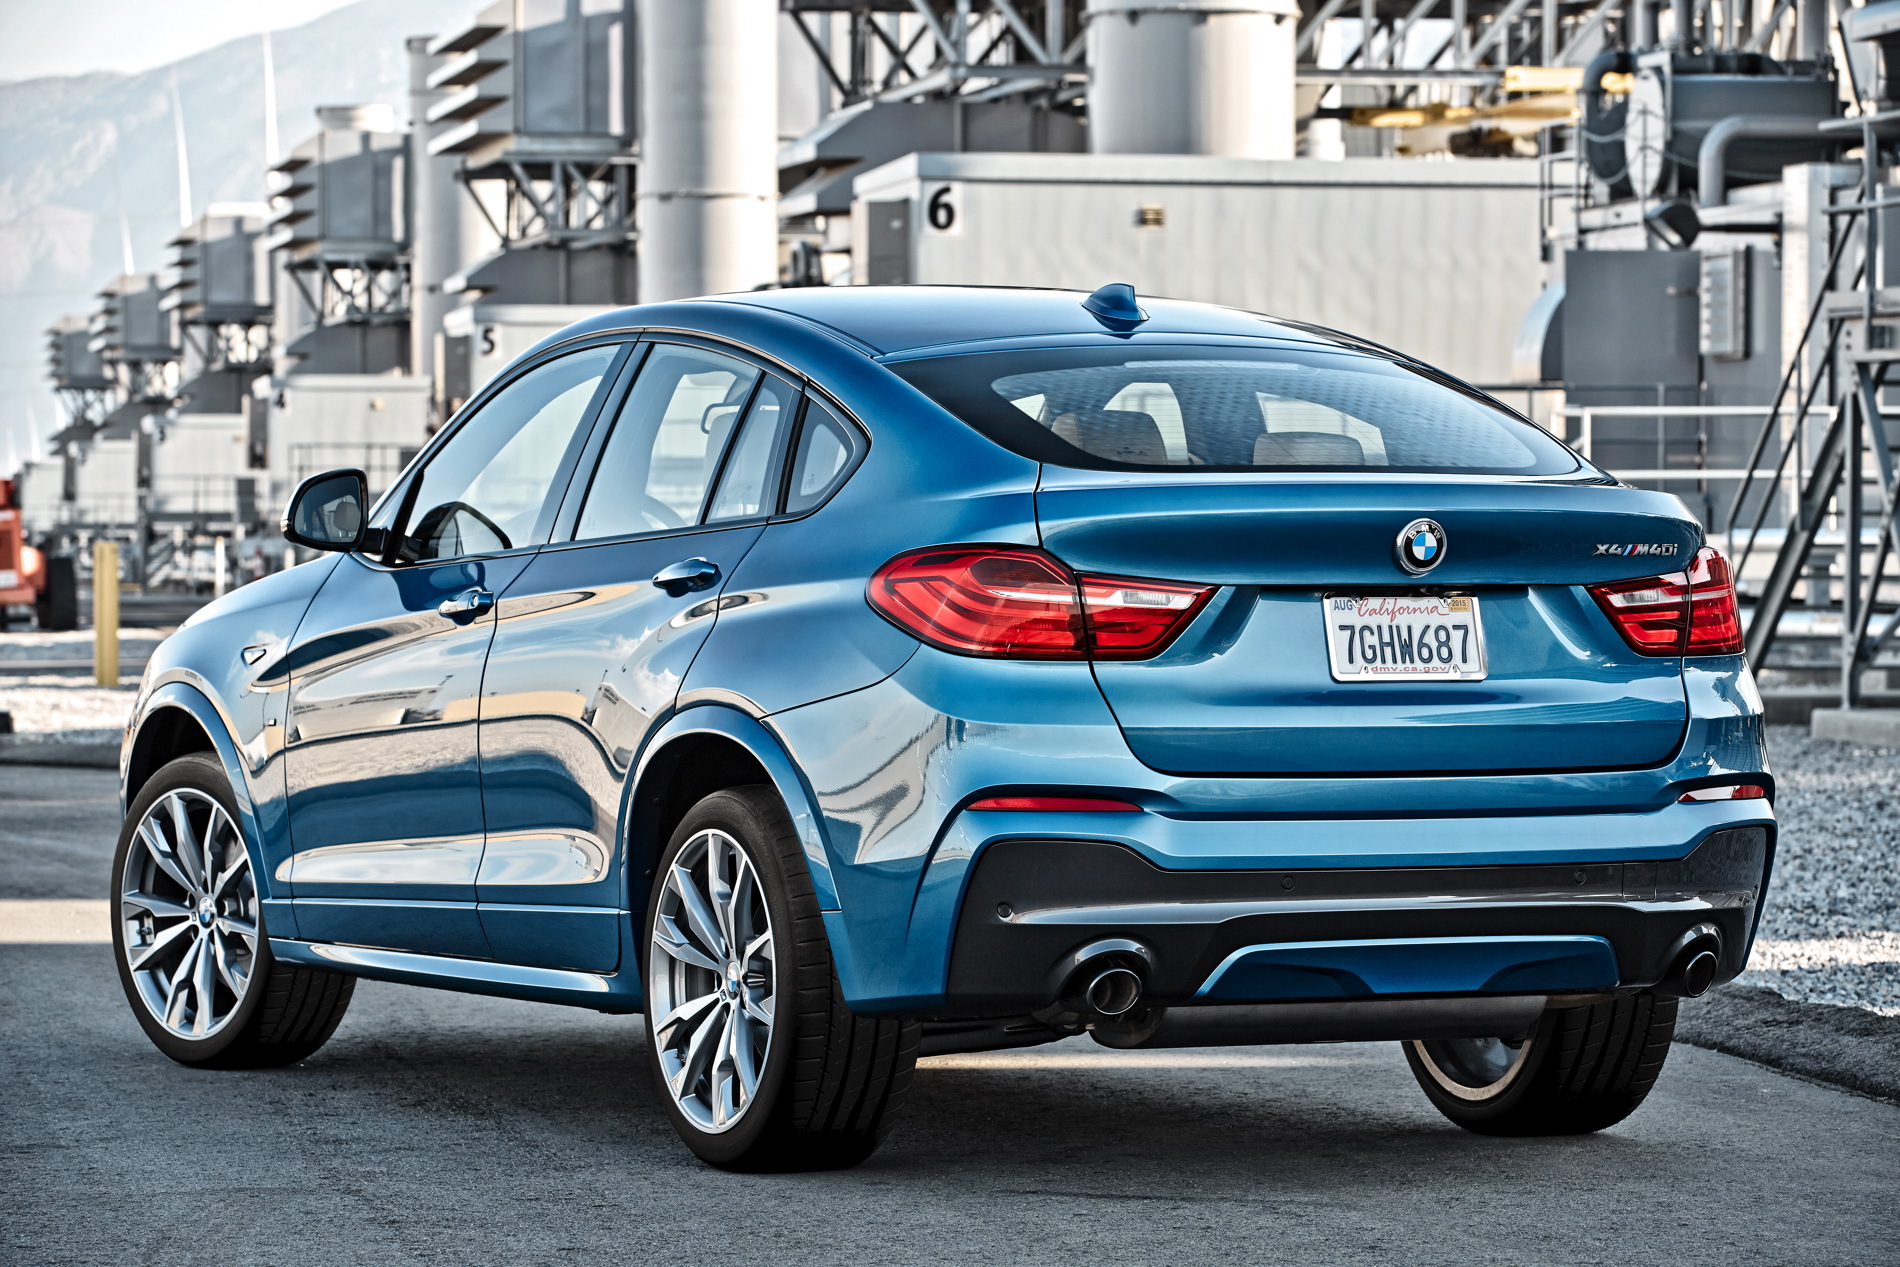 2016 BMW X4 M40i hits dealerships in February 2016 starting at $57,800